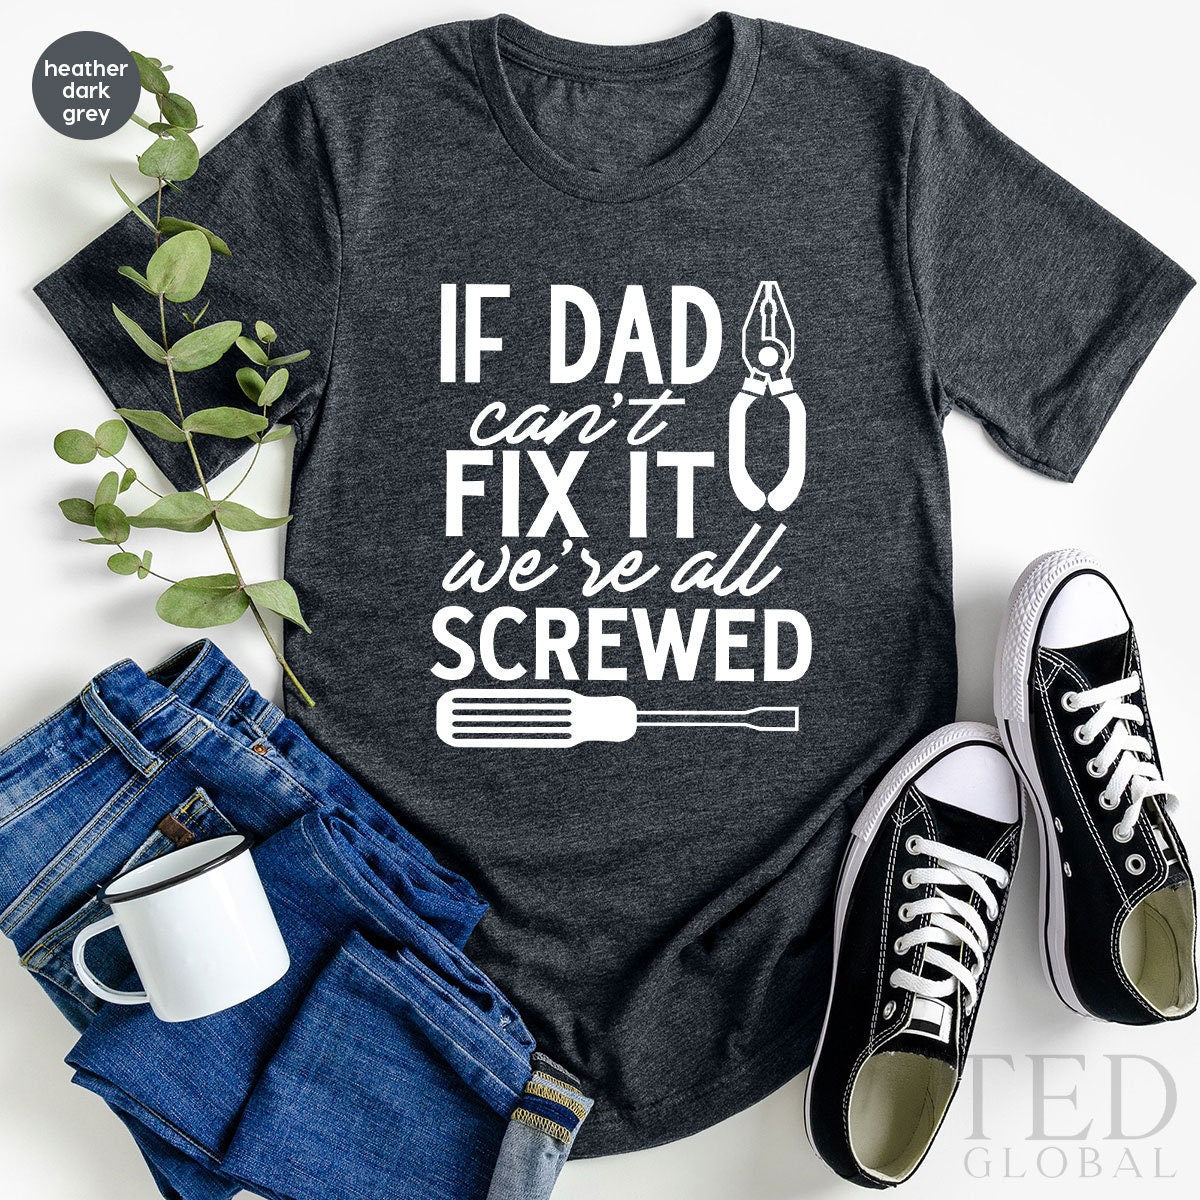 Funny Dad Shirt, Handyman T Shirt, Carpenter TShirt, Woodworker Shirt, Gift For Dad, If Dad Cant Fix It We Are All Screwed,Handyman Dad Gift - Fastdeliverytees.com